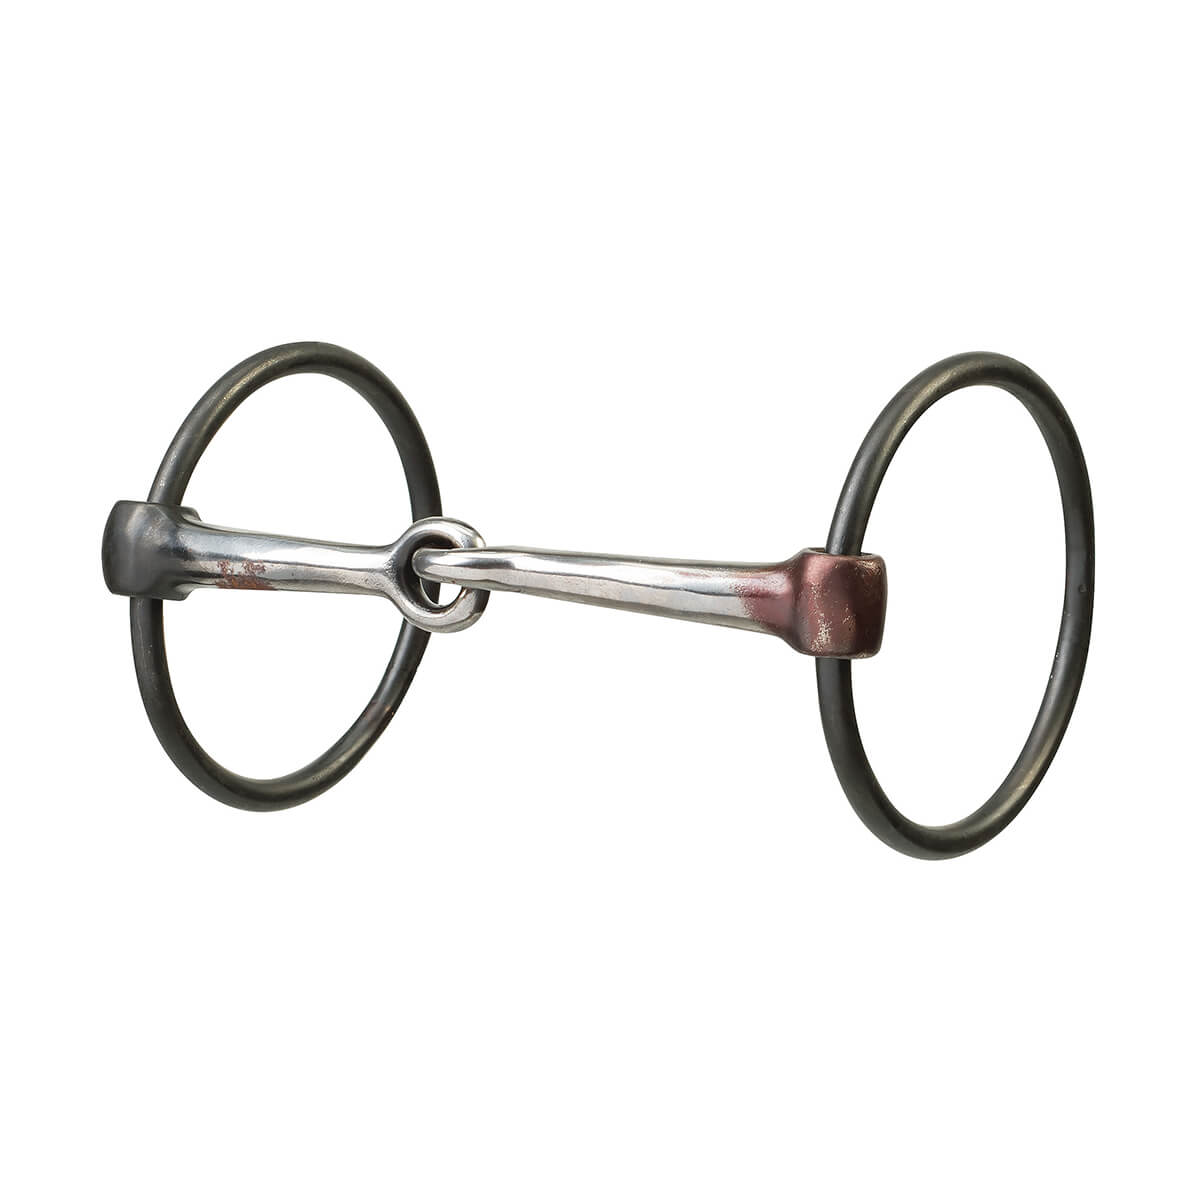 Ring Snaffle Bit with Sweet Iron Snaffle Mouth with Copper Inlay - Black - 5-in